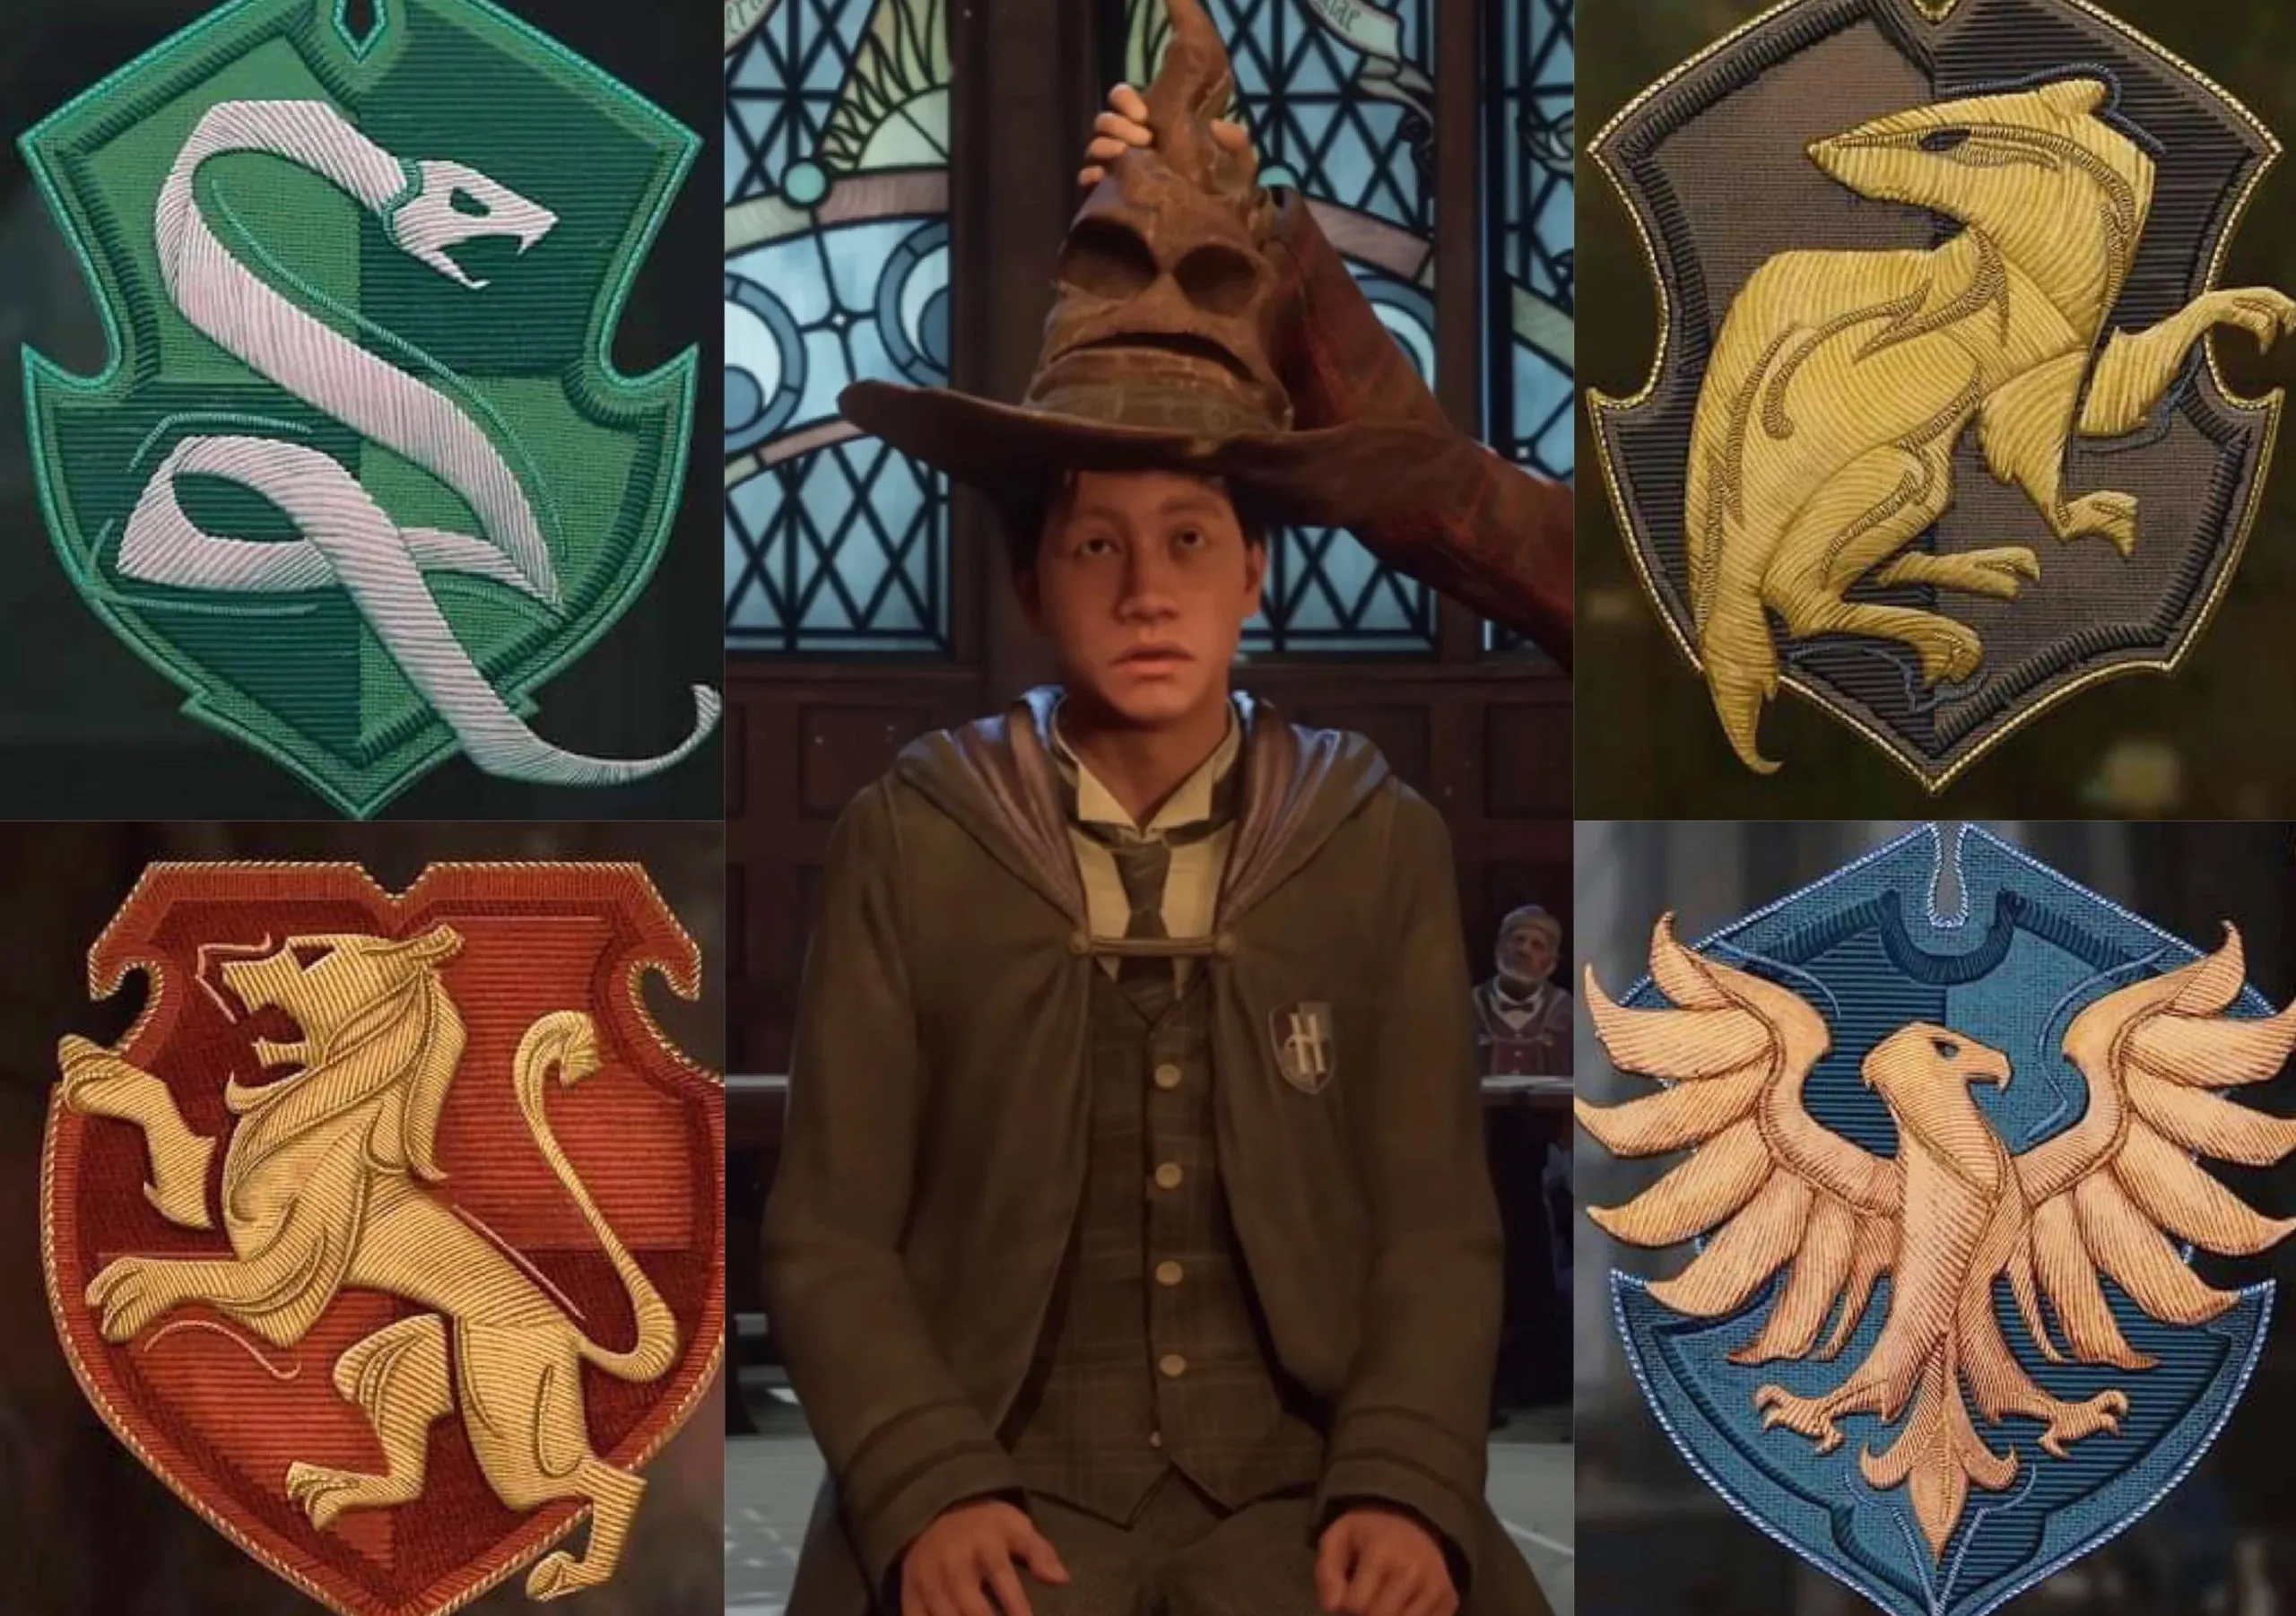 This is just for the people interested in the 'hogwarts legacy